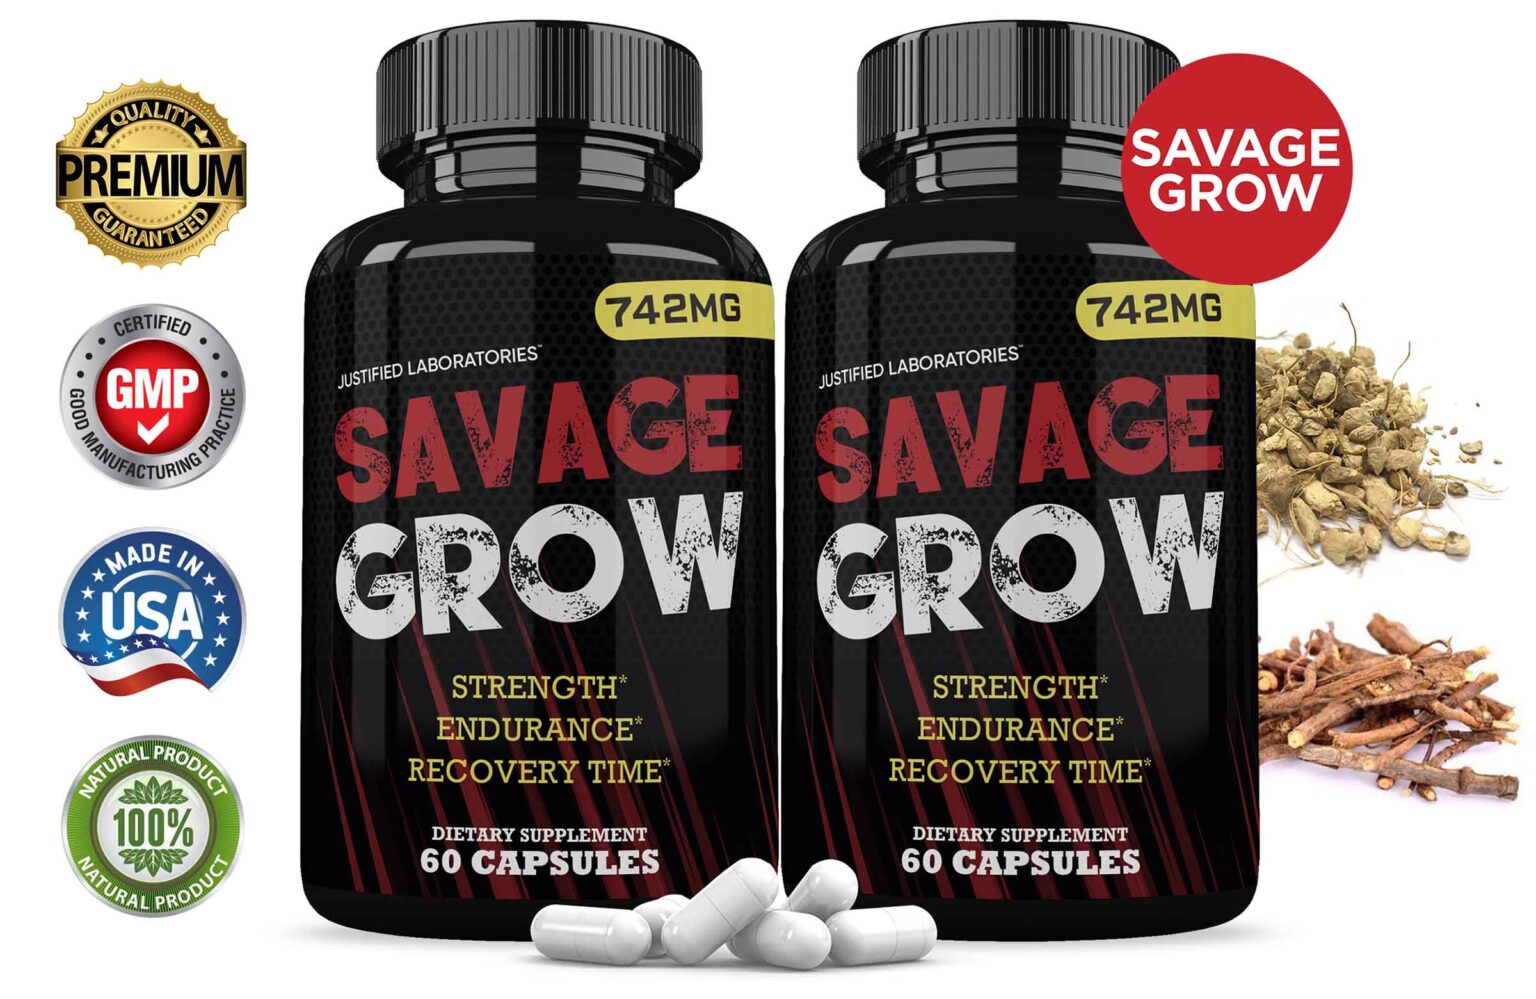 Are you looking for some natural male enhancement? Learn all about Savage Grow Plus and how it can improve your sex life today!